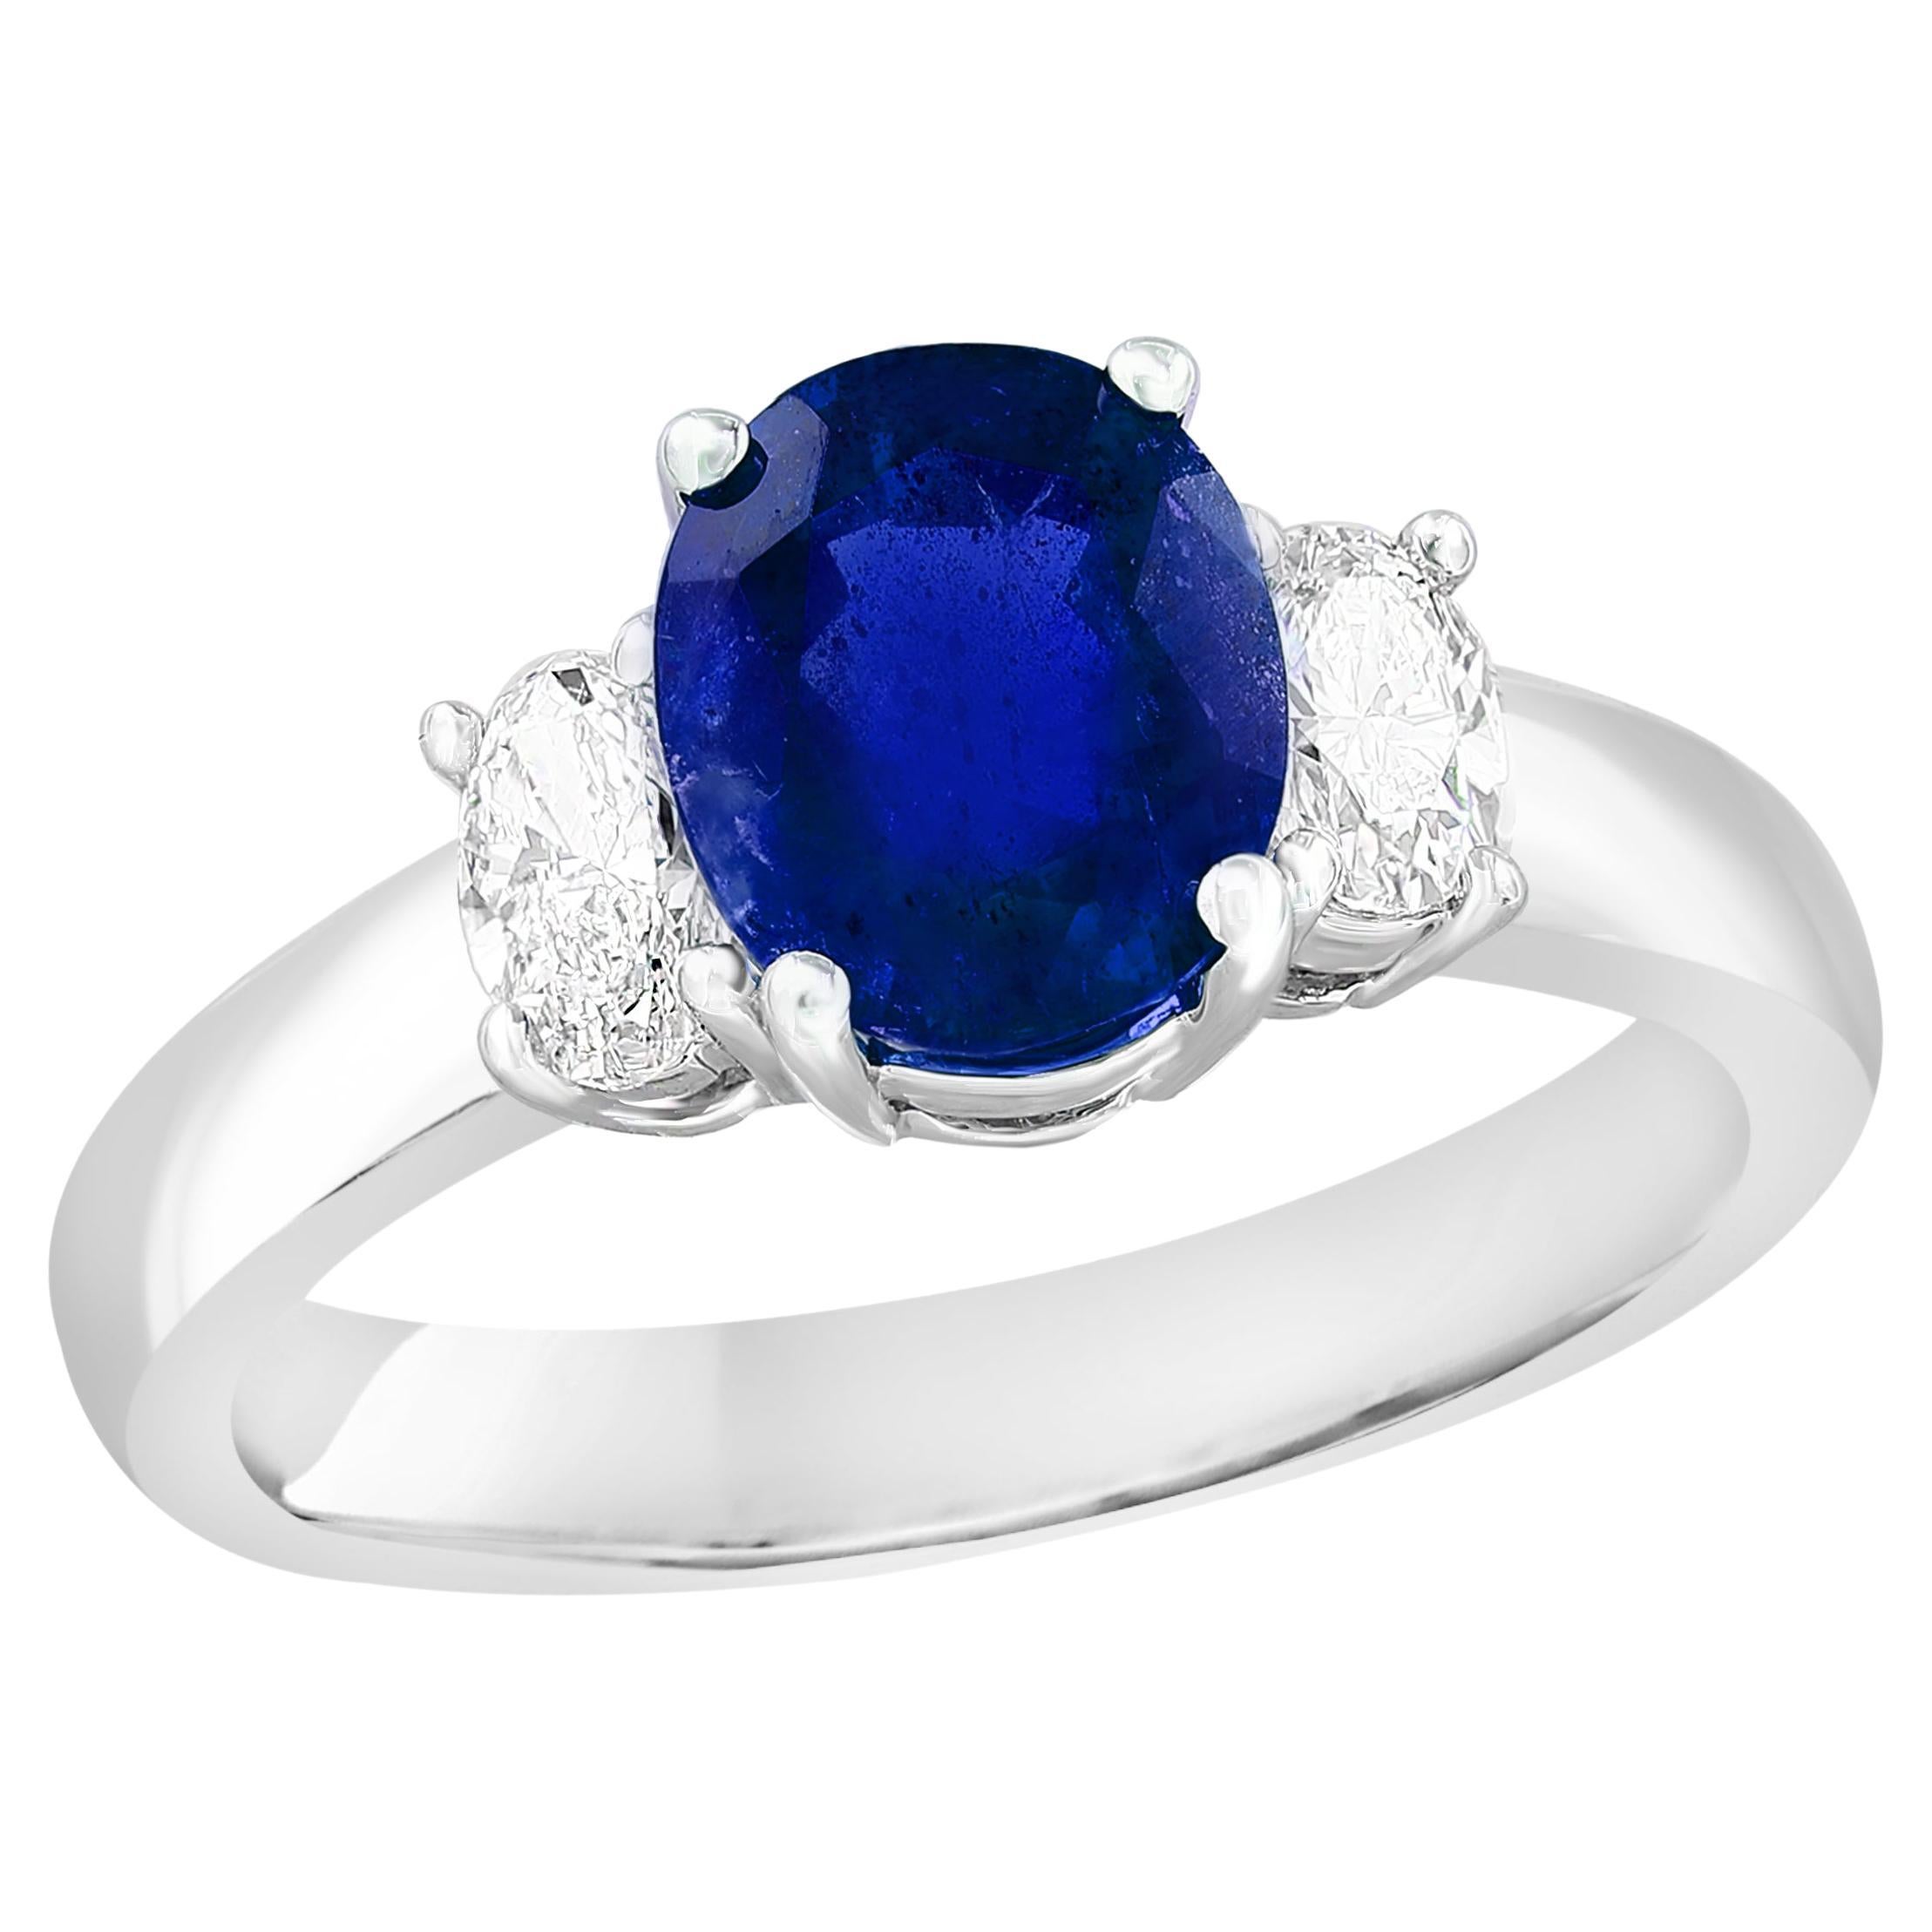 2.12 Carat Oval Cut Sapphire & Diamond 3 Stone Engagement Ring in 18k White Gold